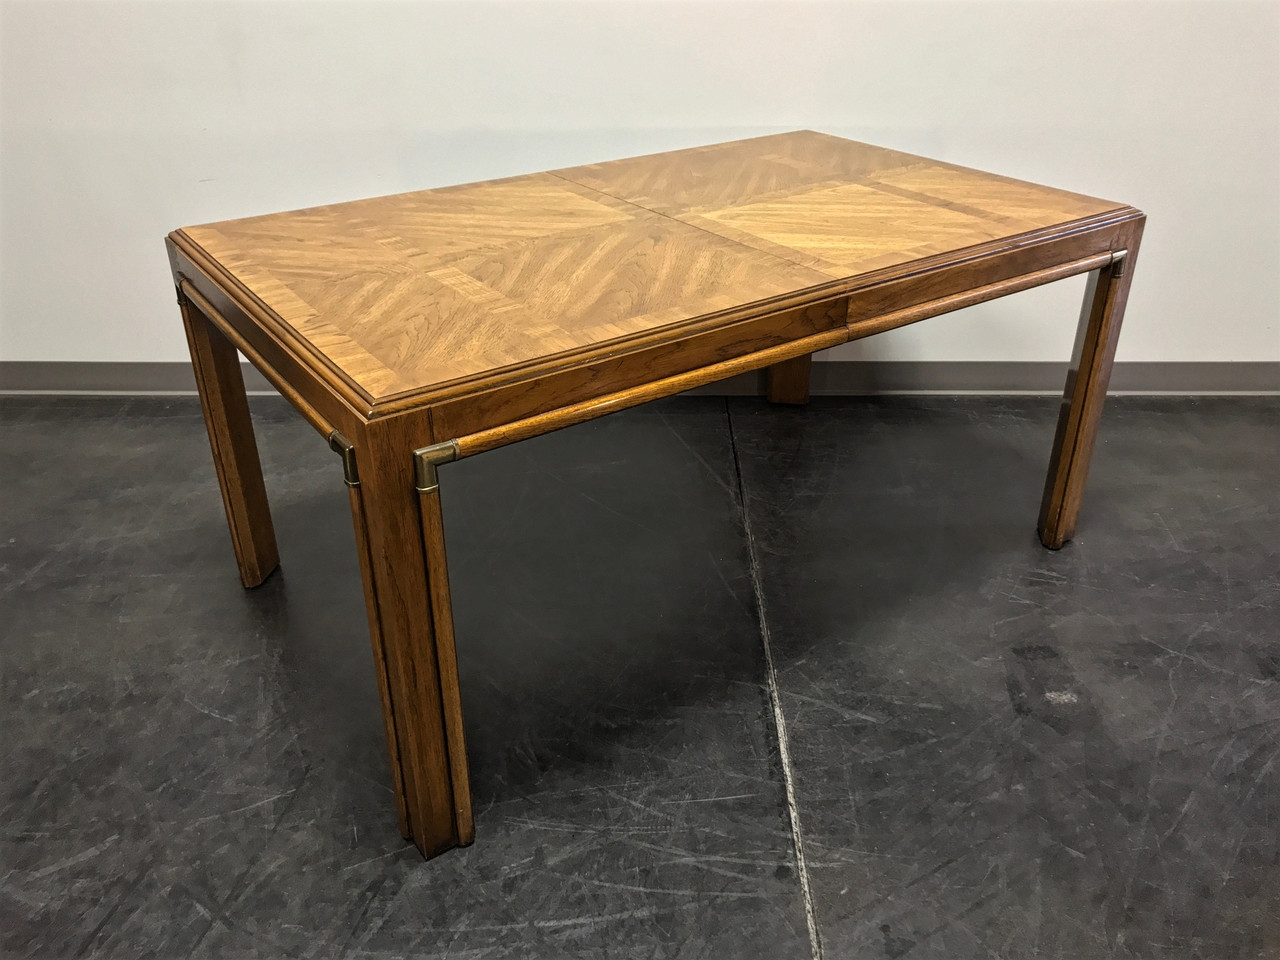 Sold Drexel Heritage Accolade Campaign Style Dining Table Ii